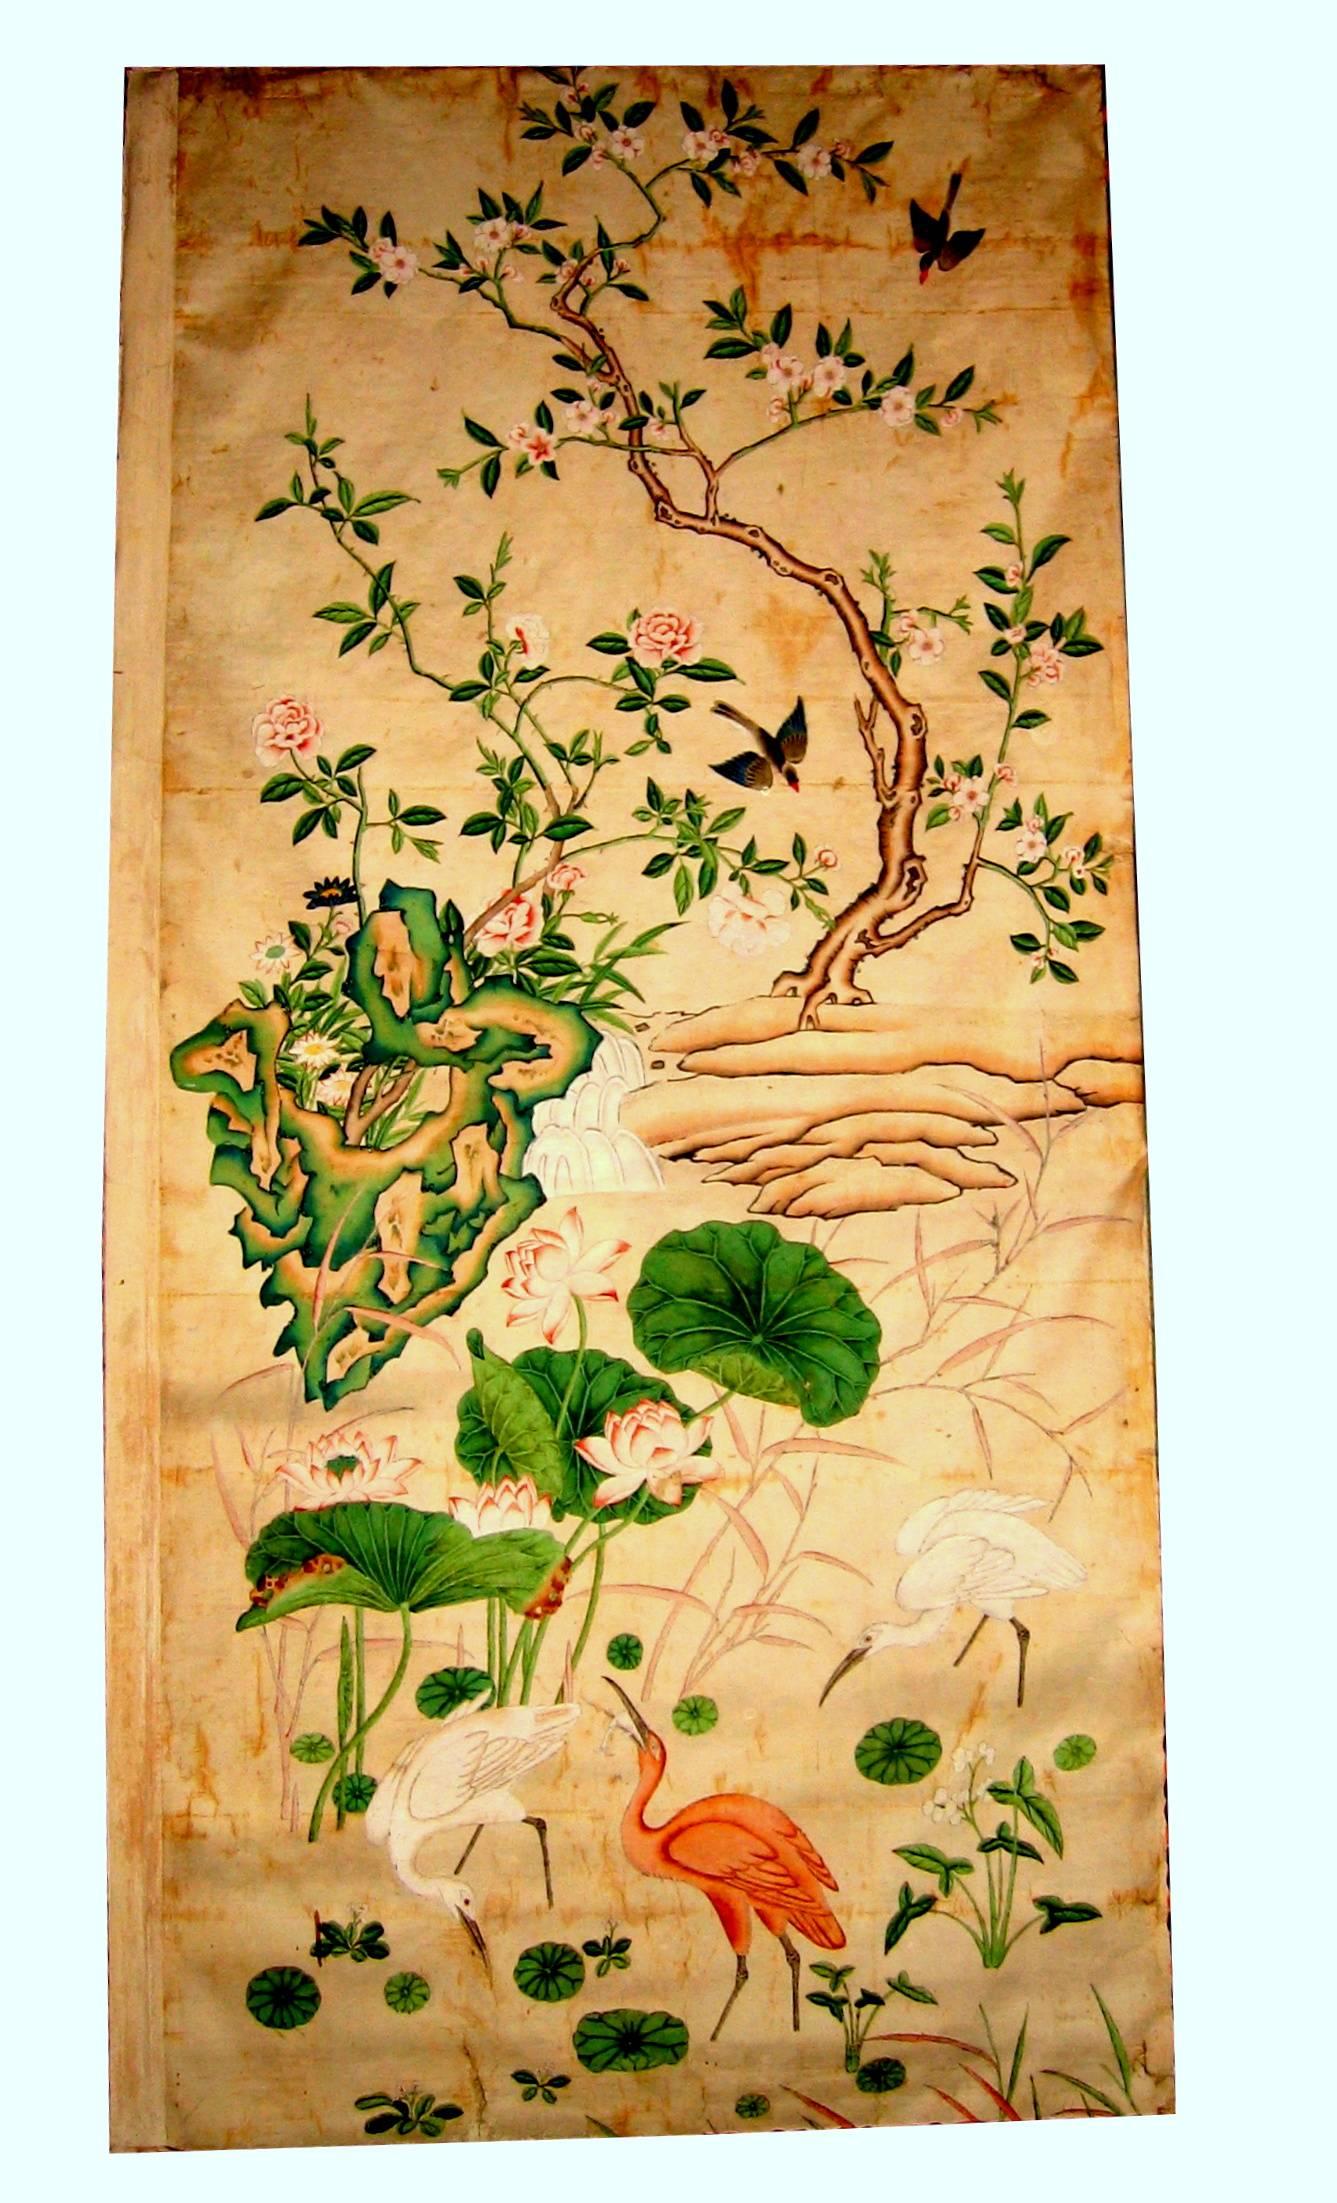 12 antique and rare Chinese wallpapers panels (Papiers peints).
Manufactured in China for the exportation in Europe,
Watercolor and gouache on paper, mounted on canvas. 

Dimensions: 

Six panels: 266 x 128 cm.
Five panels: 119 x 266 cm.
One